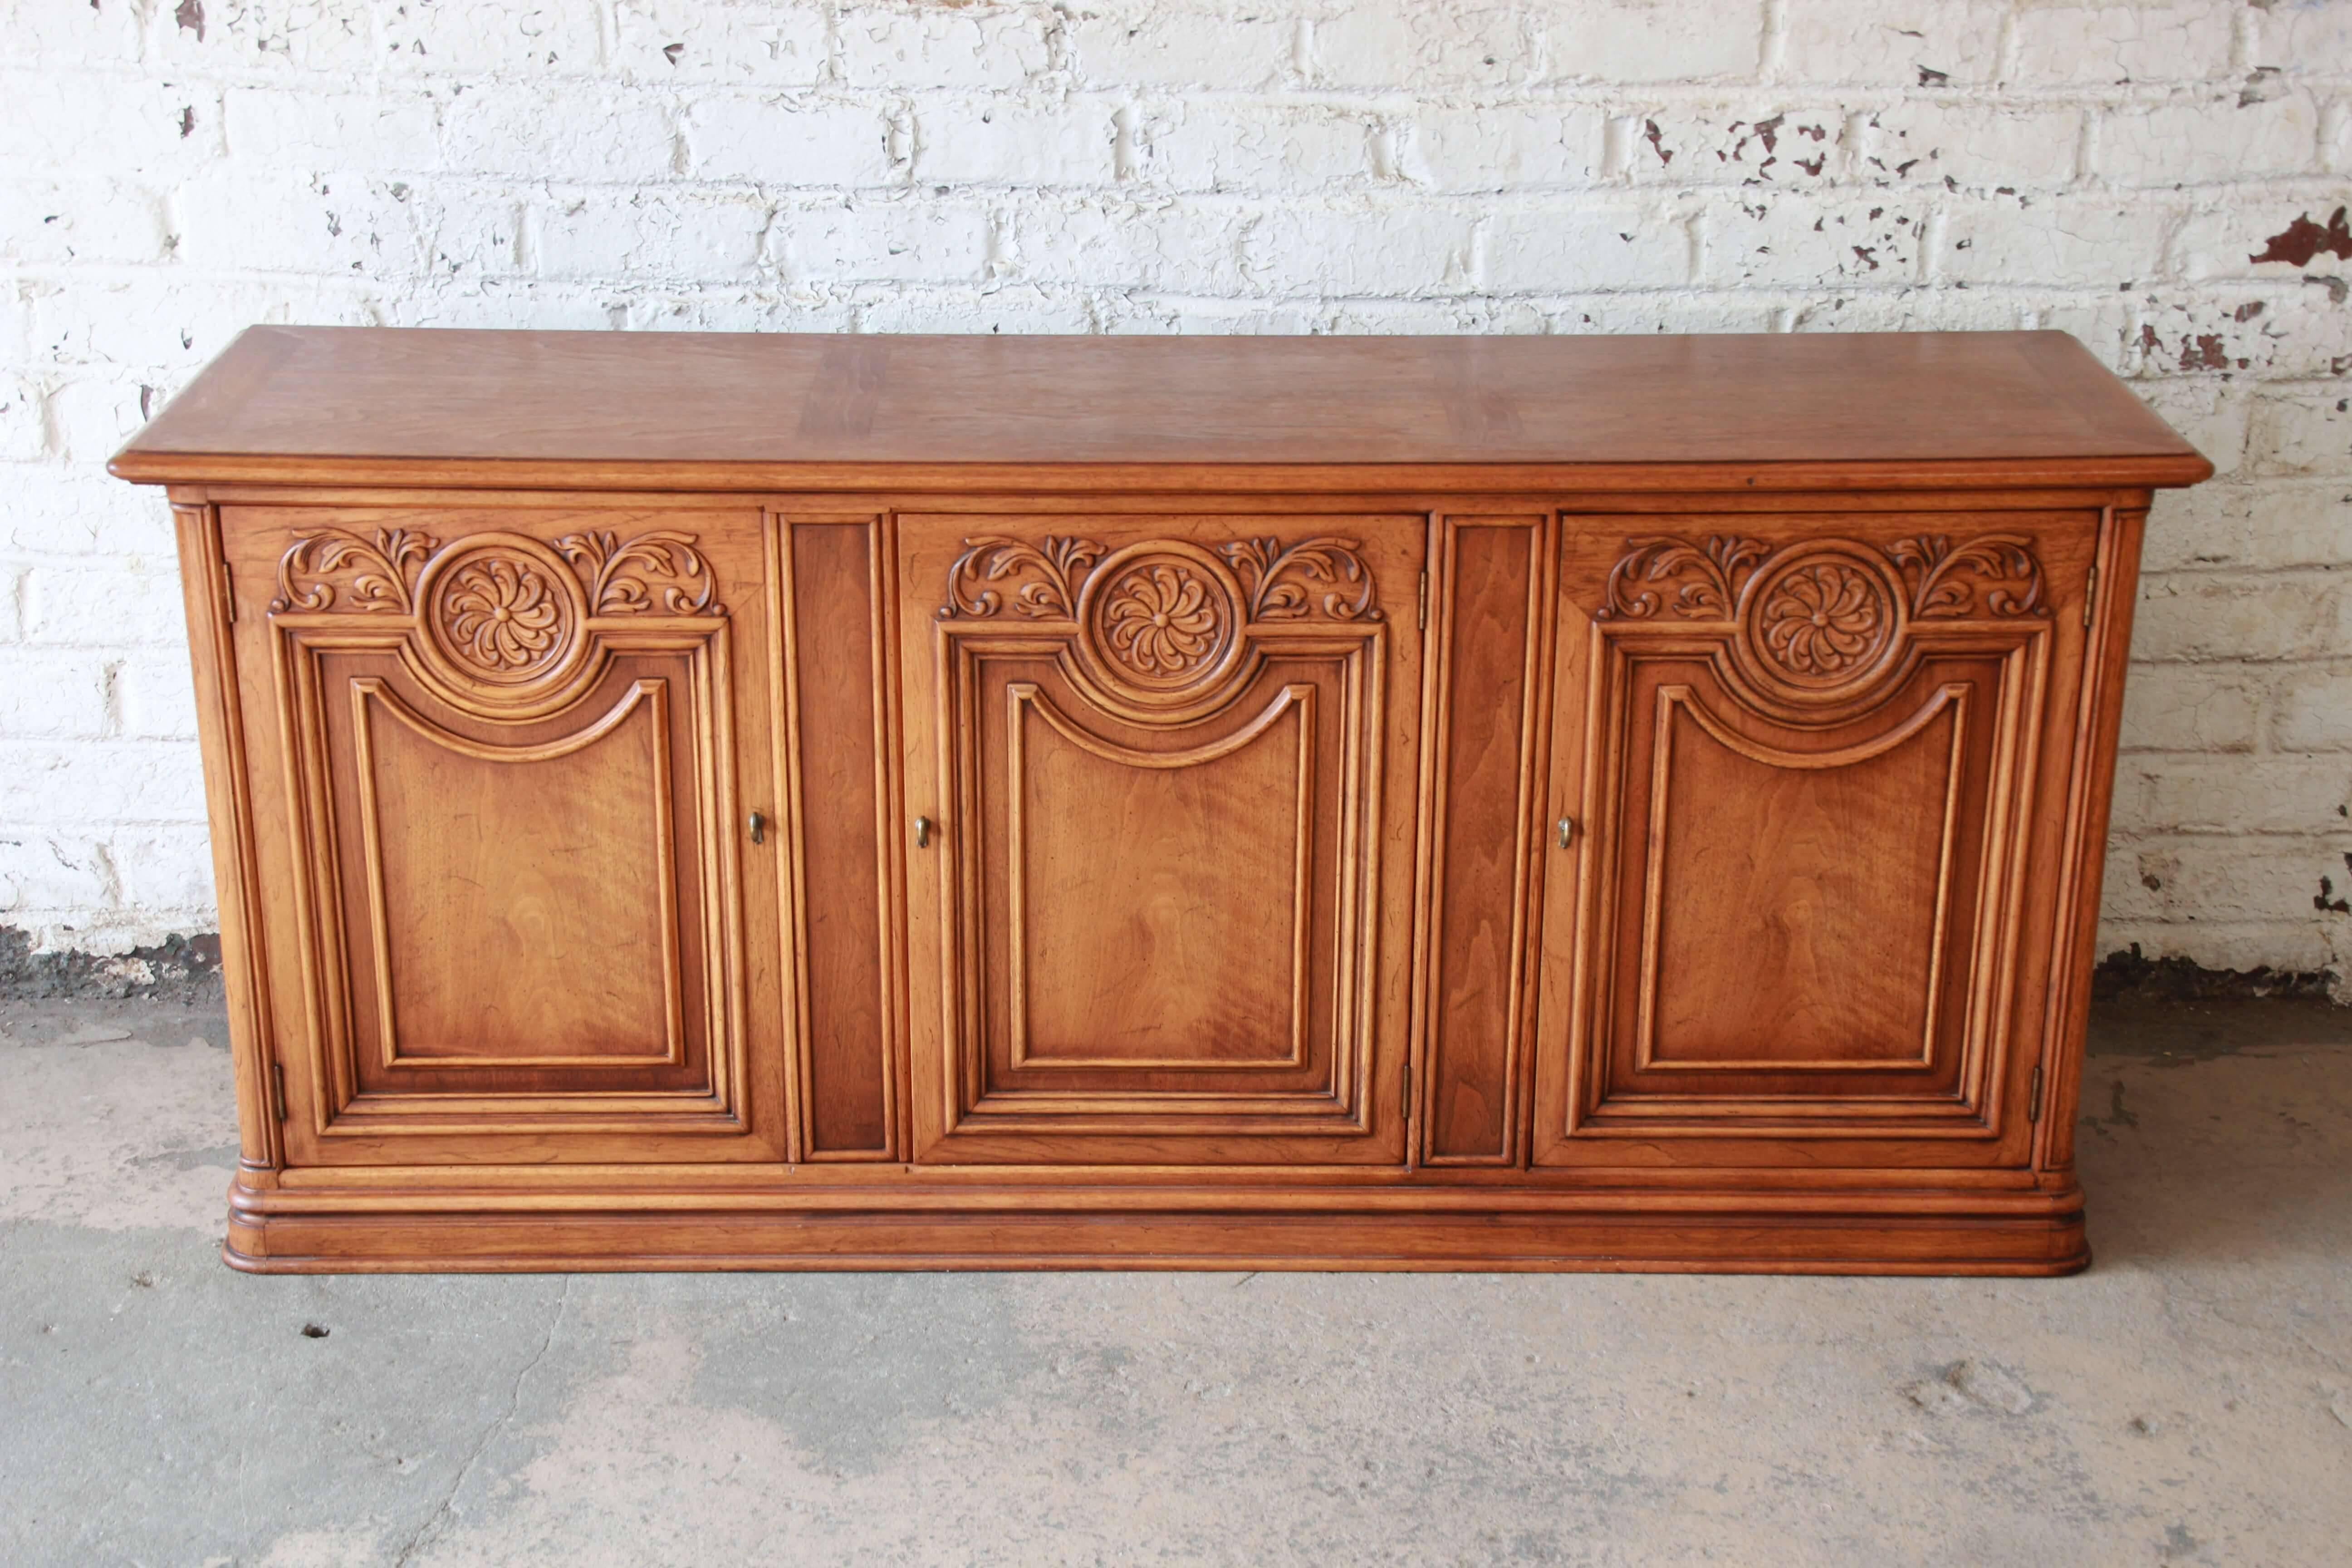 Offering a very nice French Country style sideboard by Henredon. The oak sideboard has nice French details with a plinth base. The right cabinet doors opens to an adjustable shelf. The left side doors open up to three large drawers for ample room